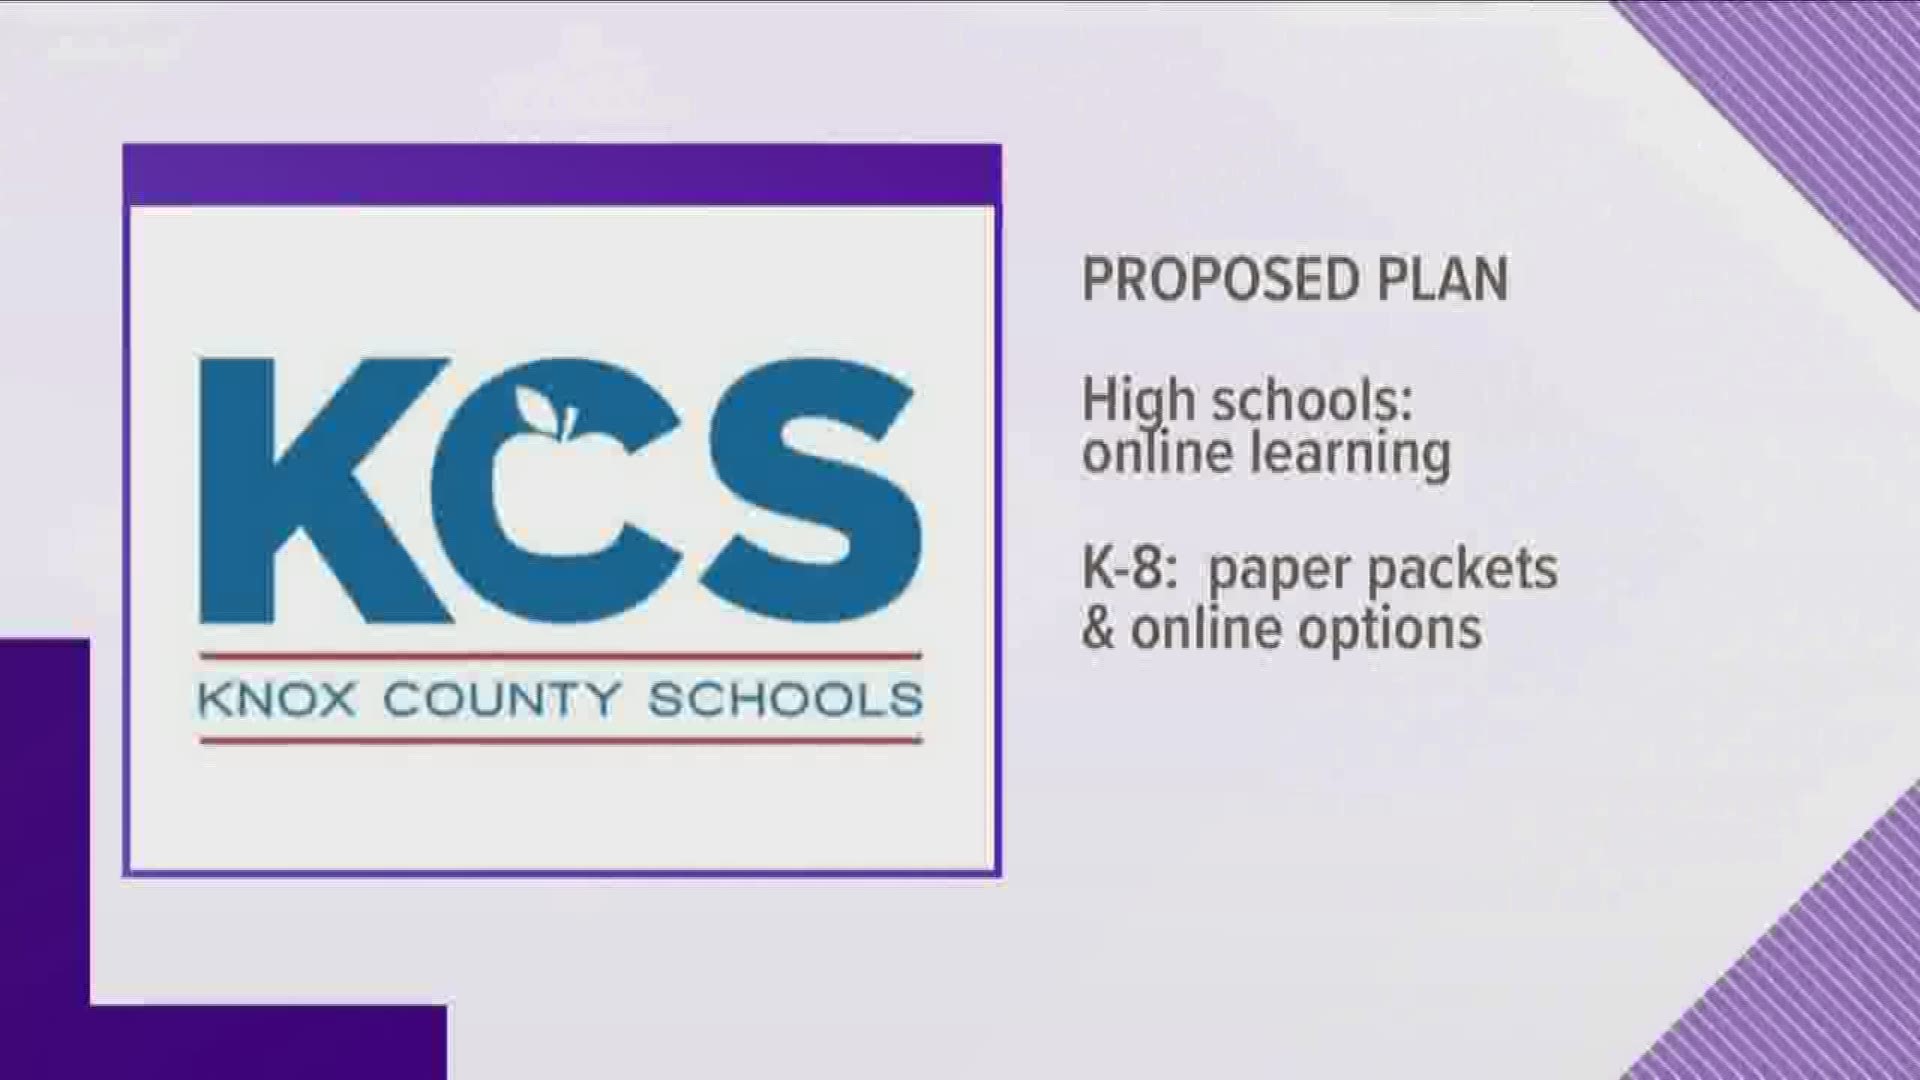 Under his plan, high schools would move to online learning. Kindergarten through eighth grade would utilize paper packets along with some online learning options.